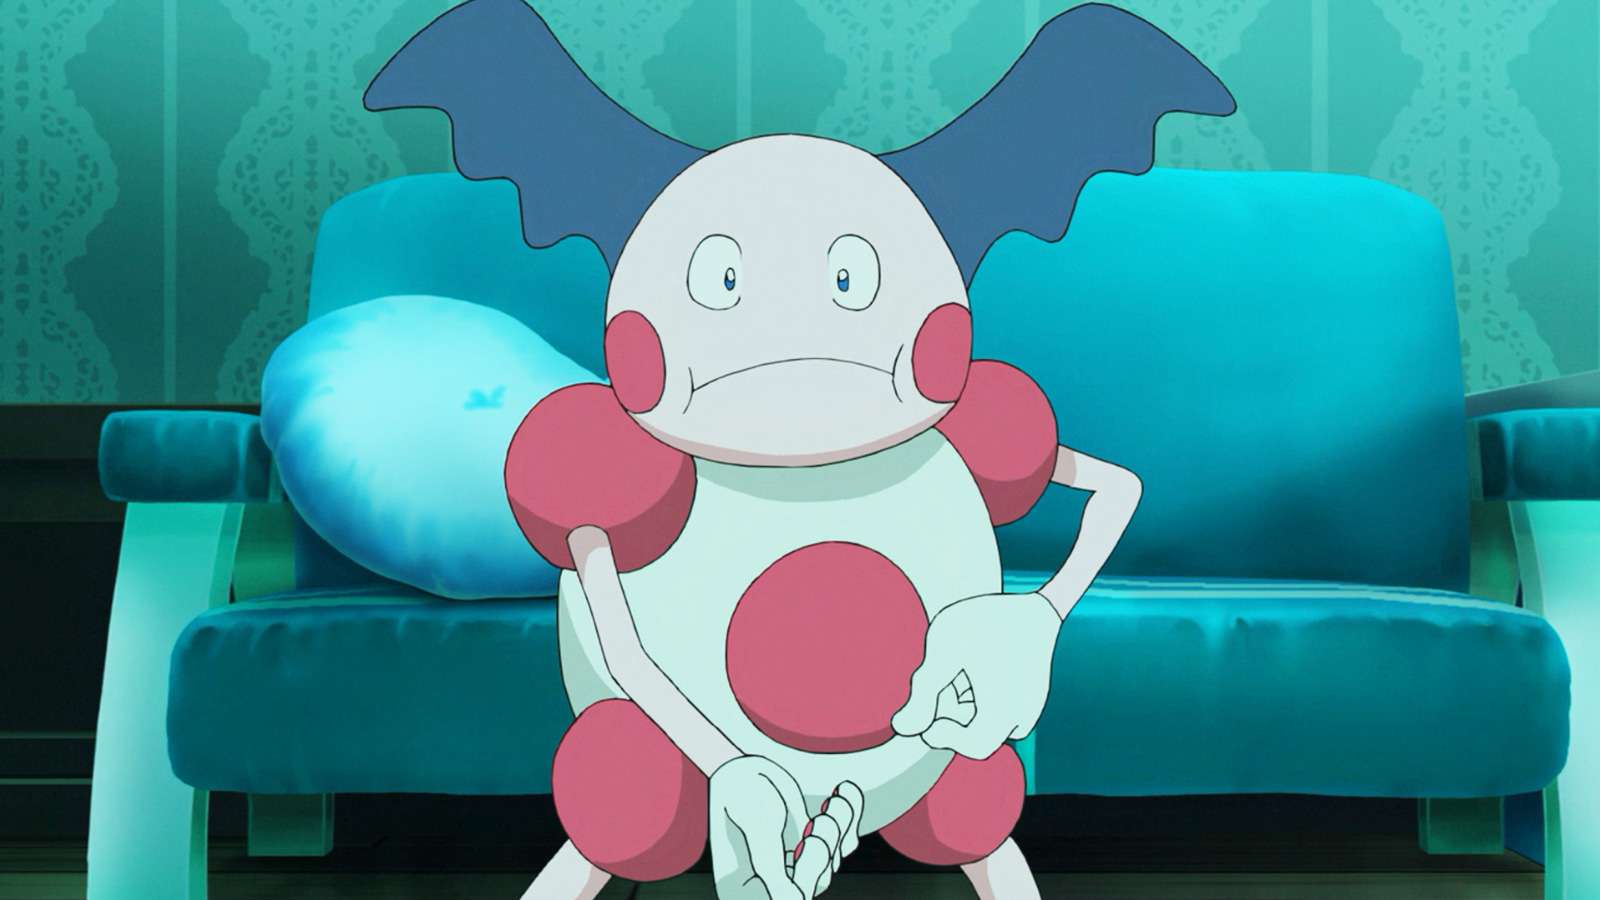 Screenshot of scared Mr. Mime from Pokemon anime.